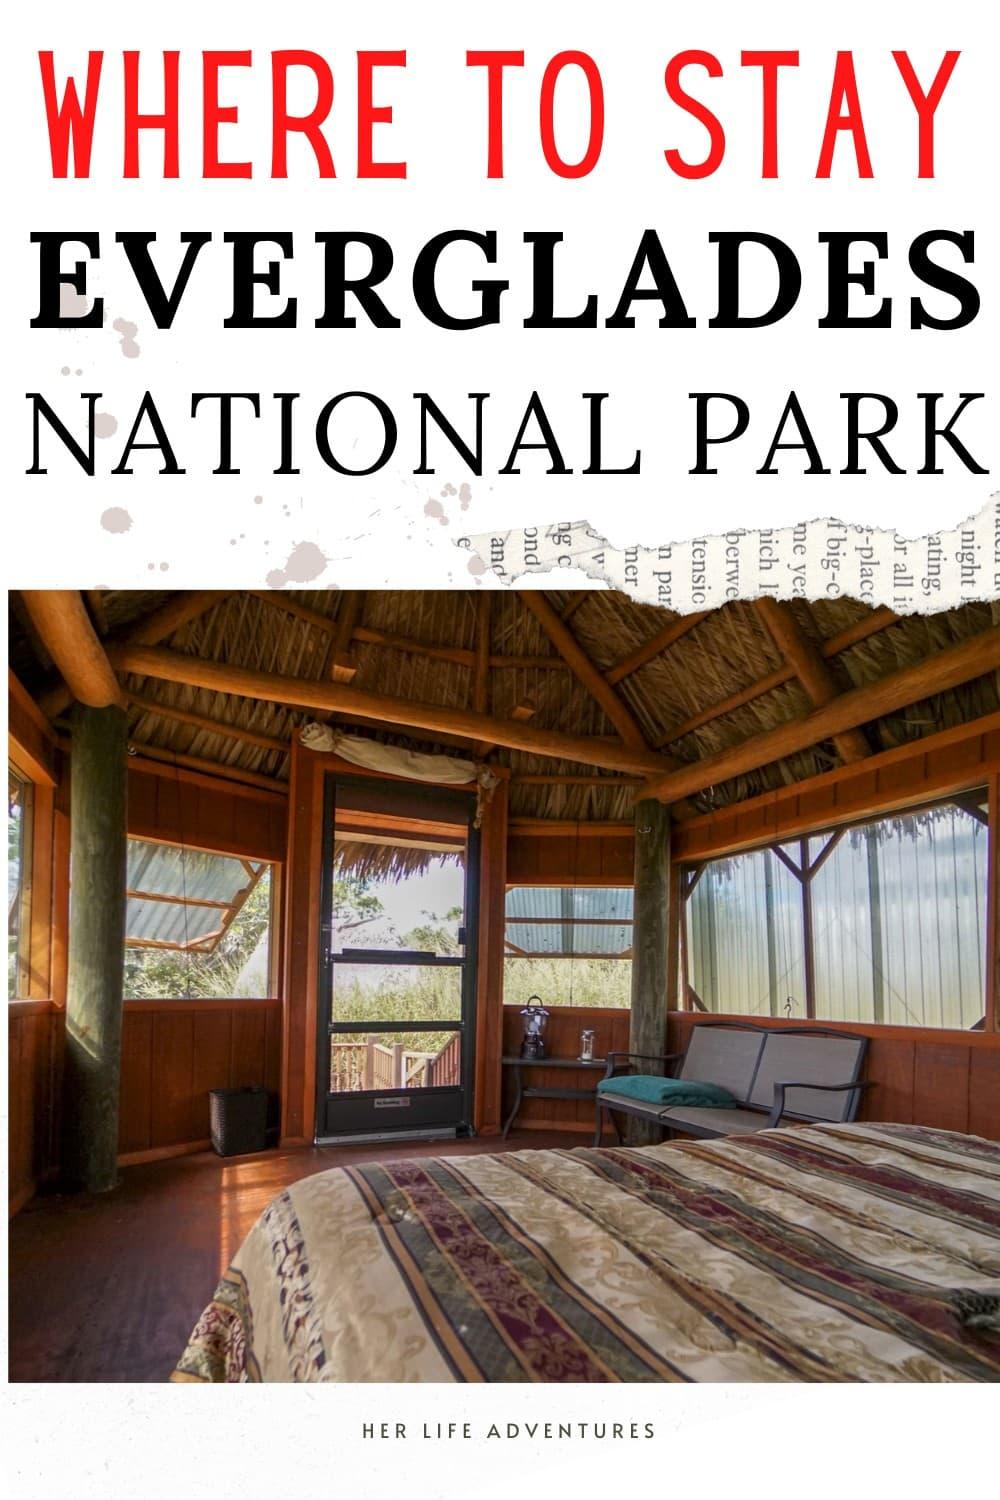 15 Unique Places to Stay in Everglades National Park